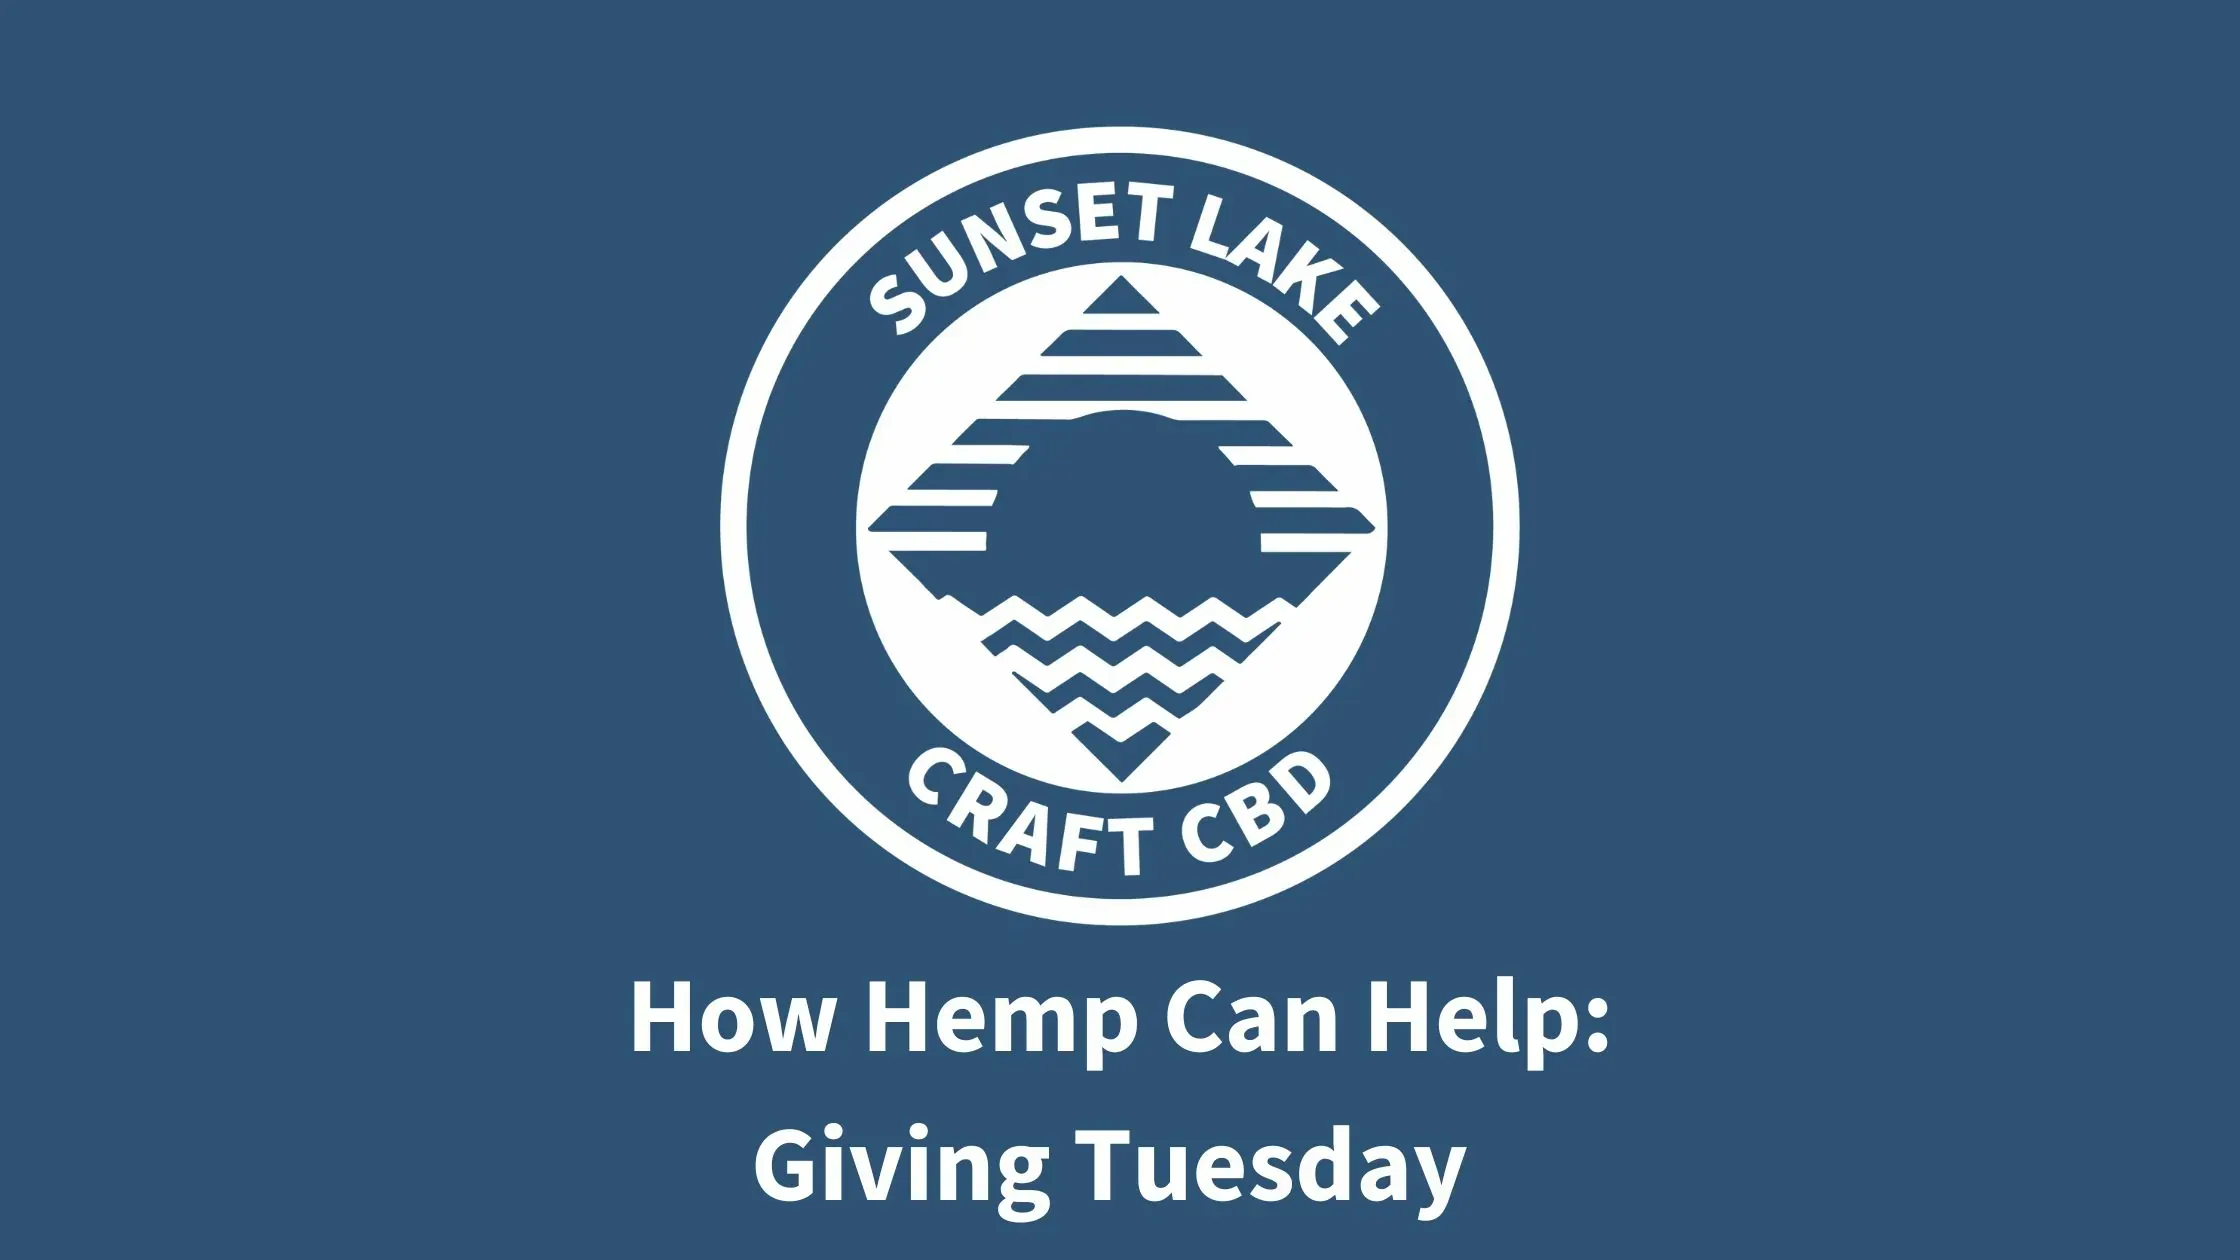 Sunset Lake Logo on Blue. Text reads "How Hemp Can Help: Giving Tuesday"